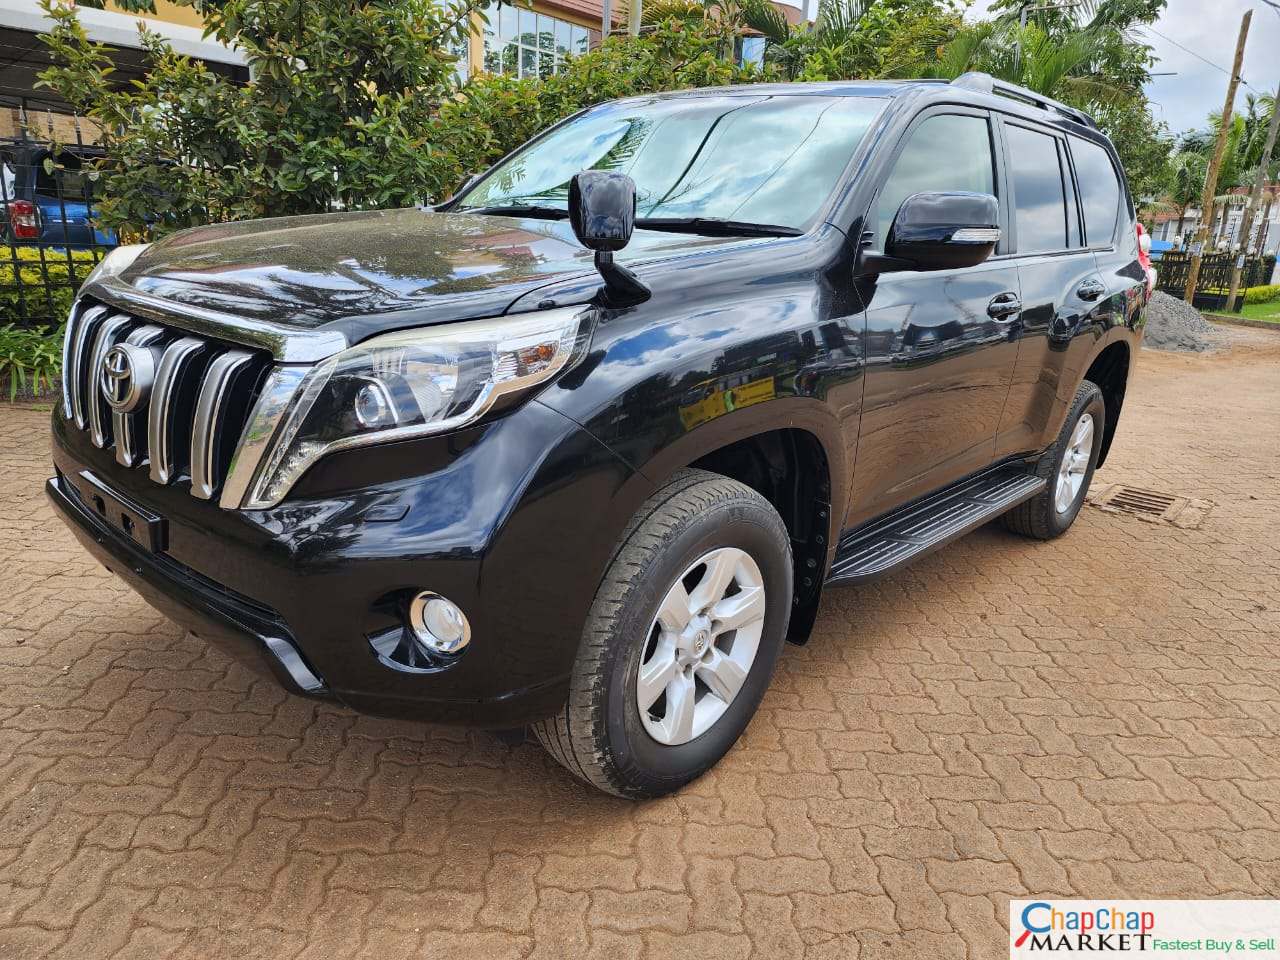 Toyota Prado TZG QUICK SALE Fully loaded trade in Ok EXCLUSIVE